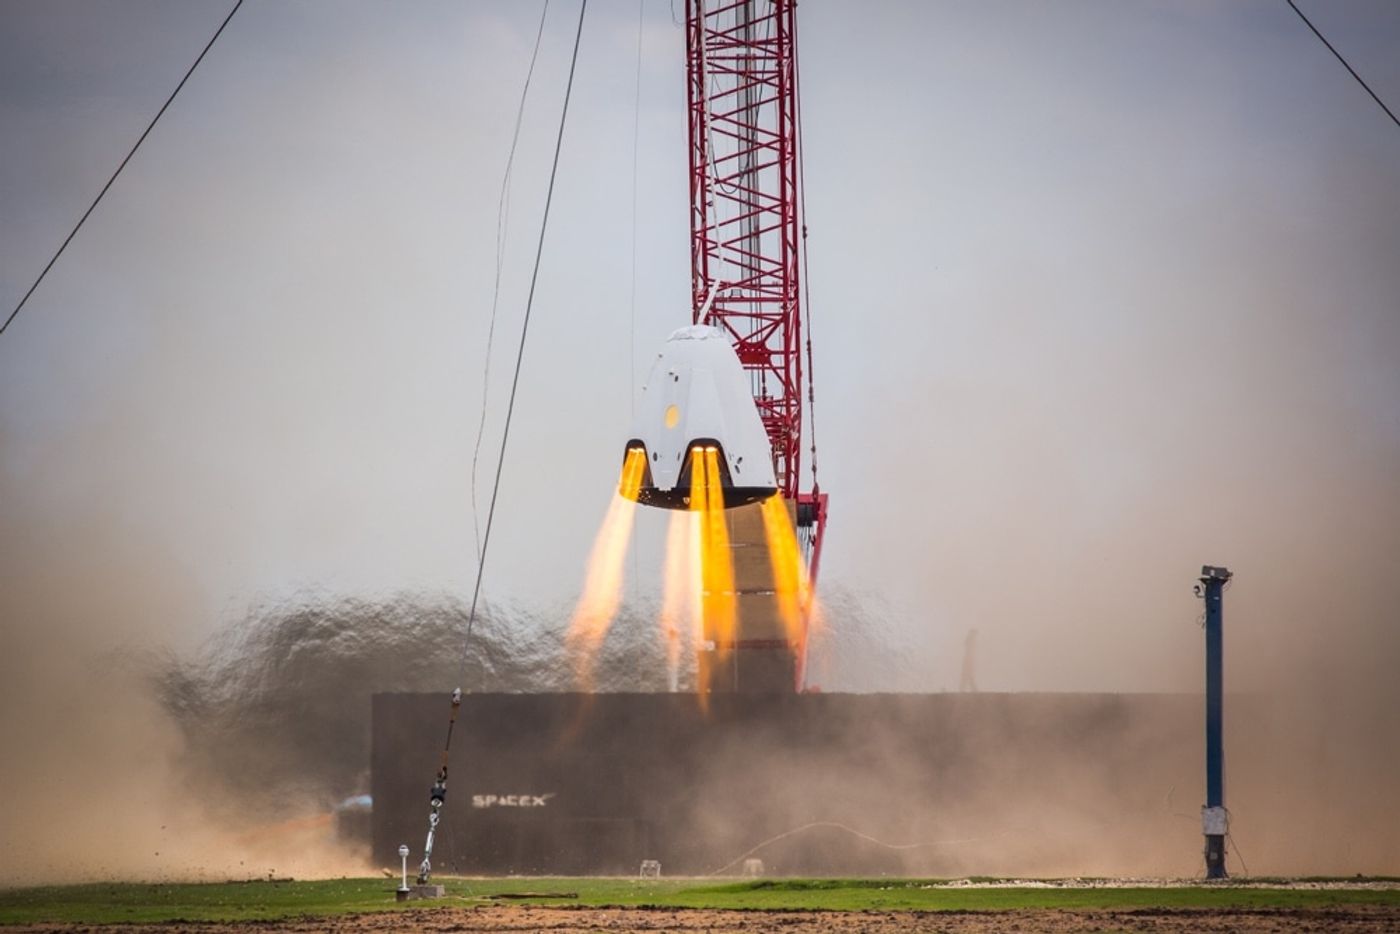 A SpaceX Dragon 2 capsule performs a hover test.